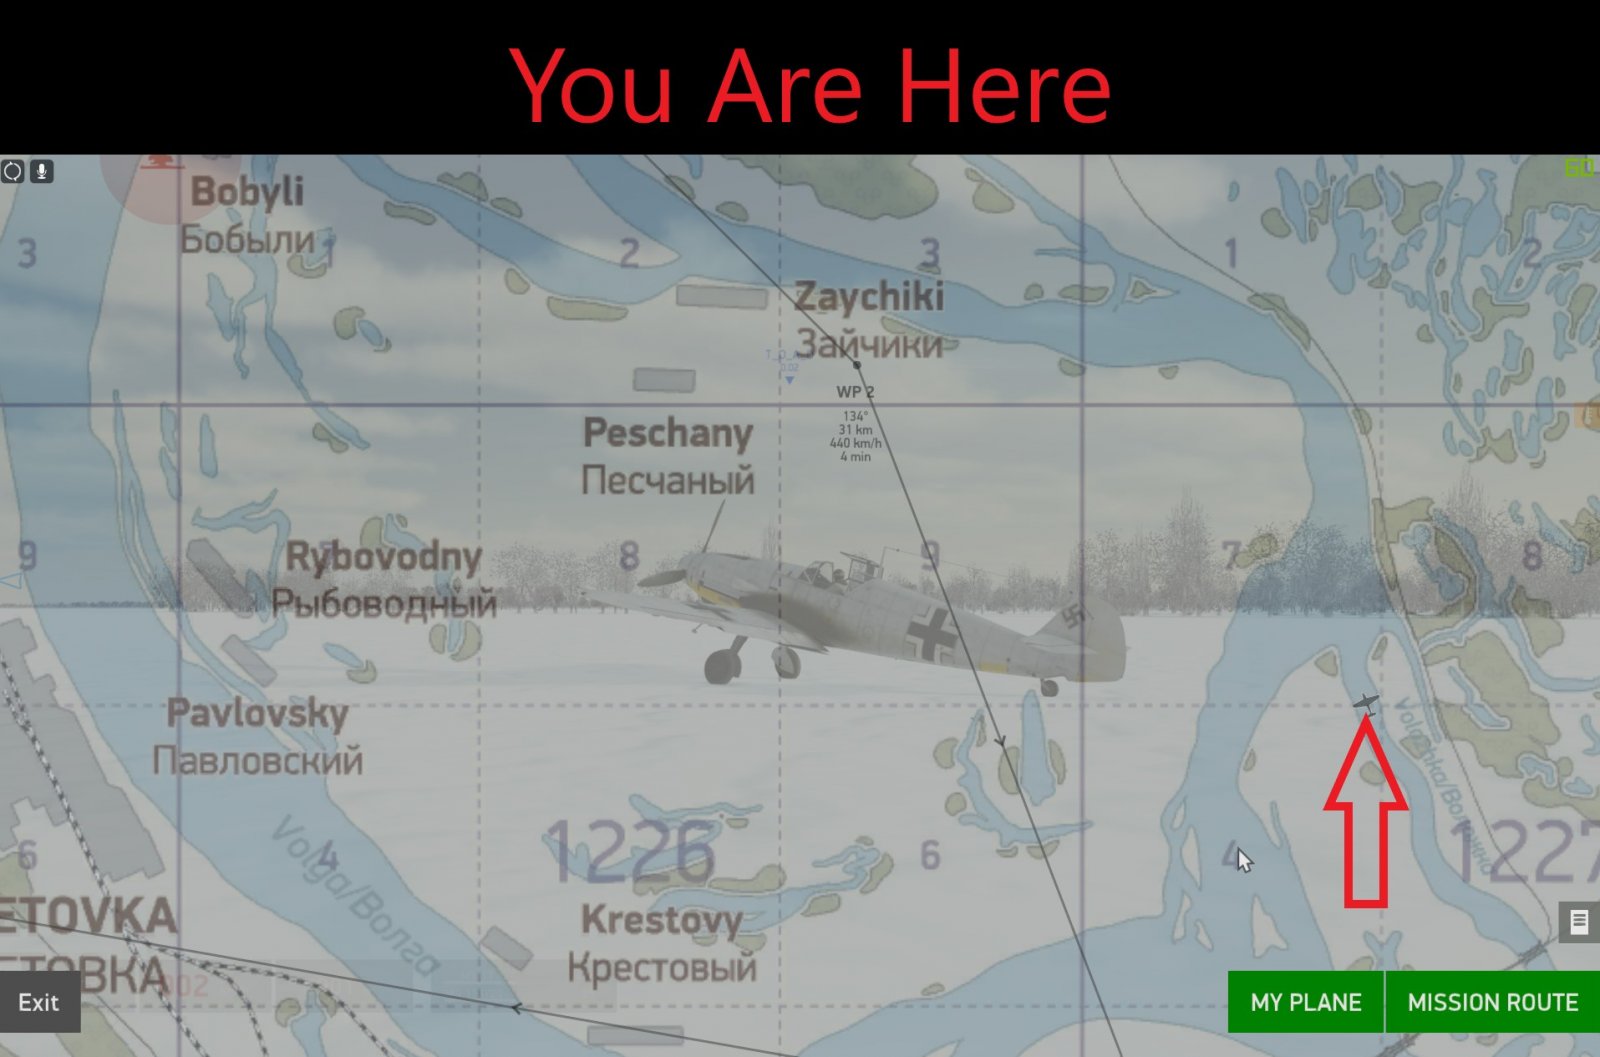 You Are Here.jpg